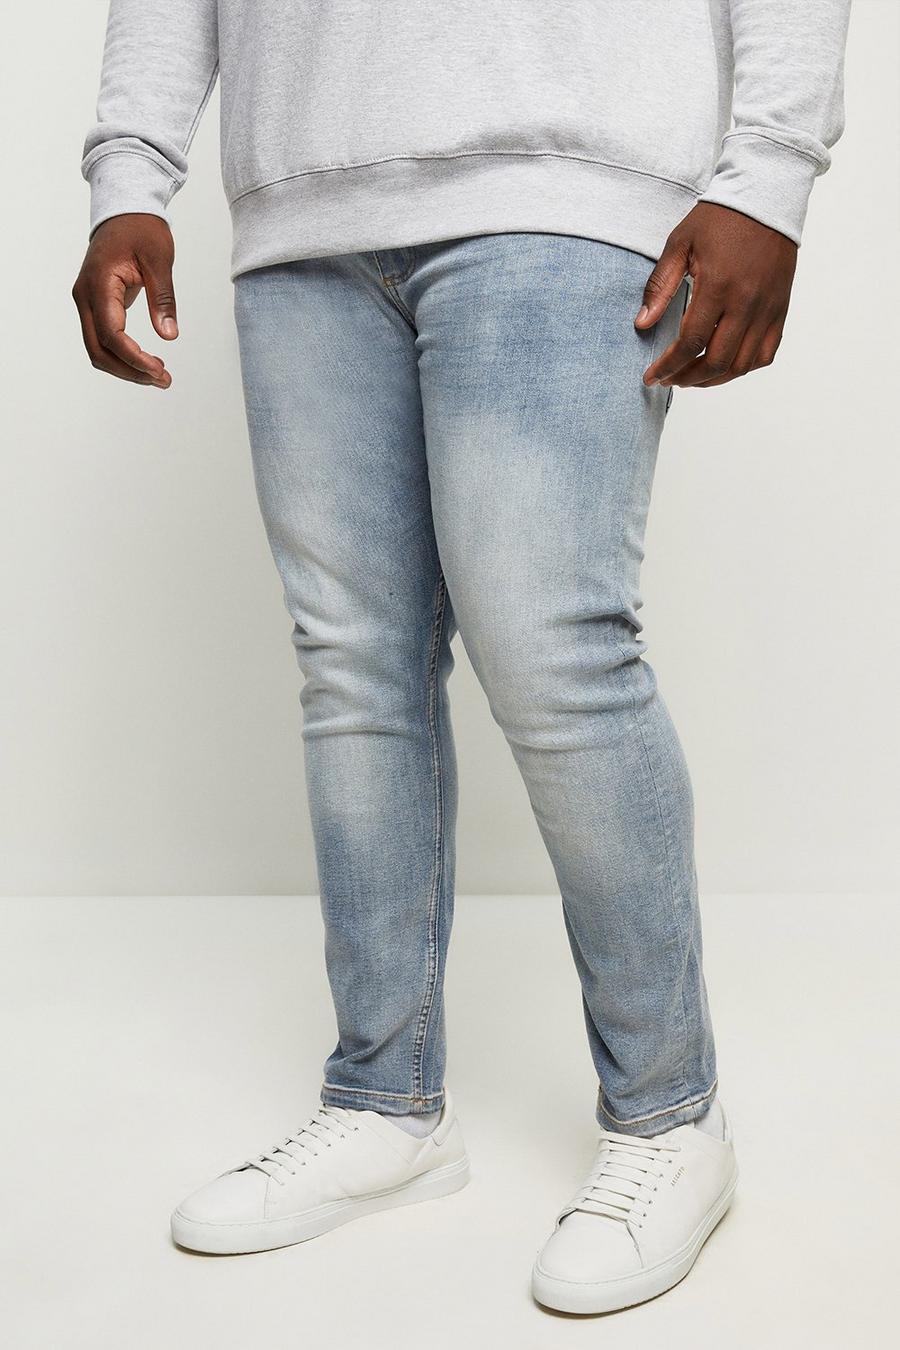 Plus And Tall Skinny Light Blue Rip Jeans